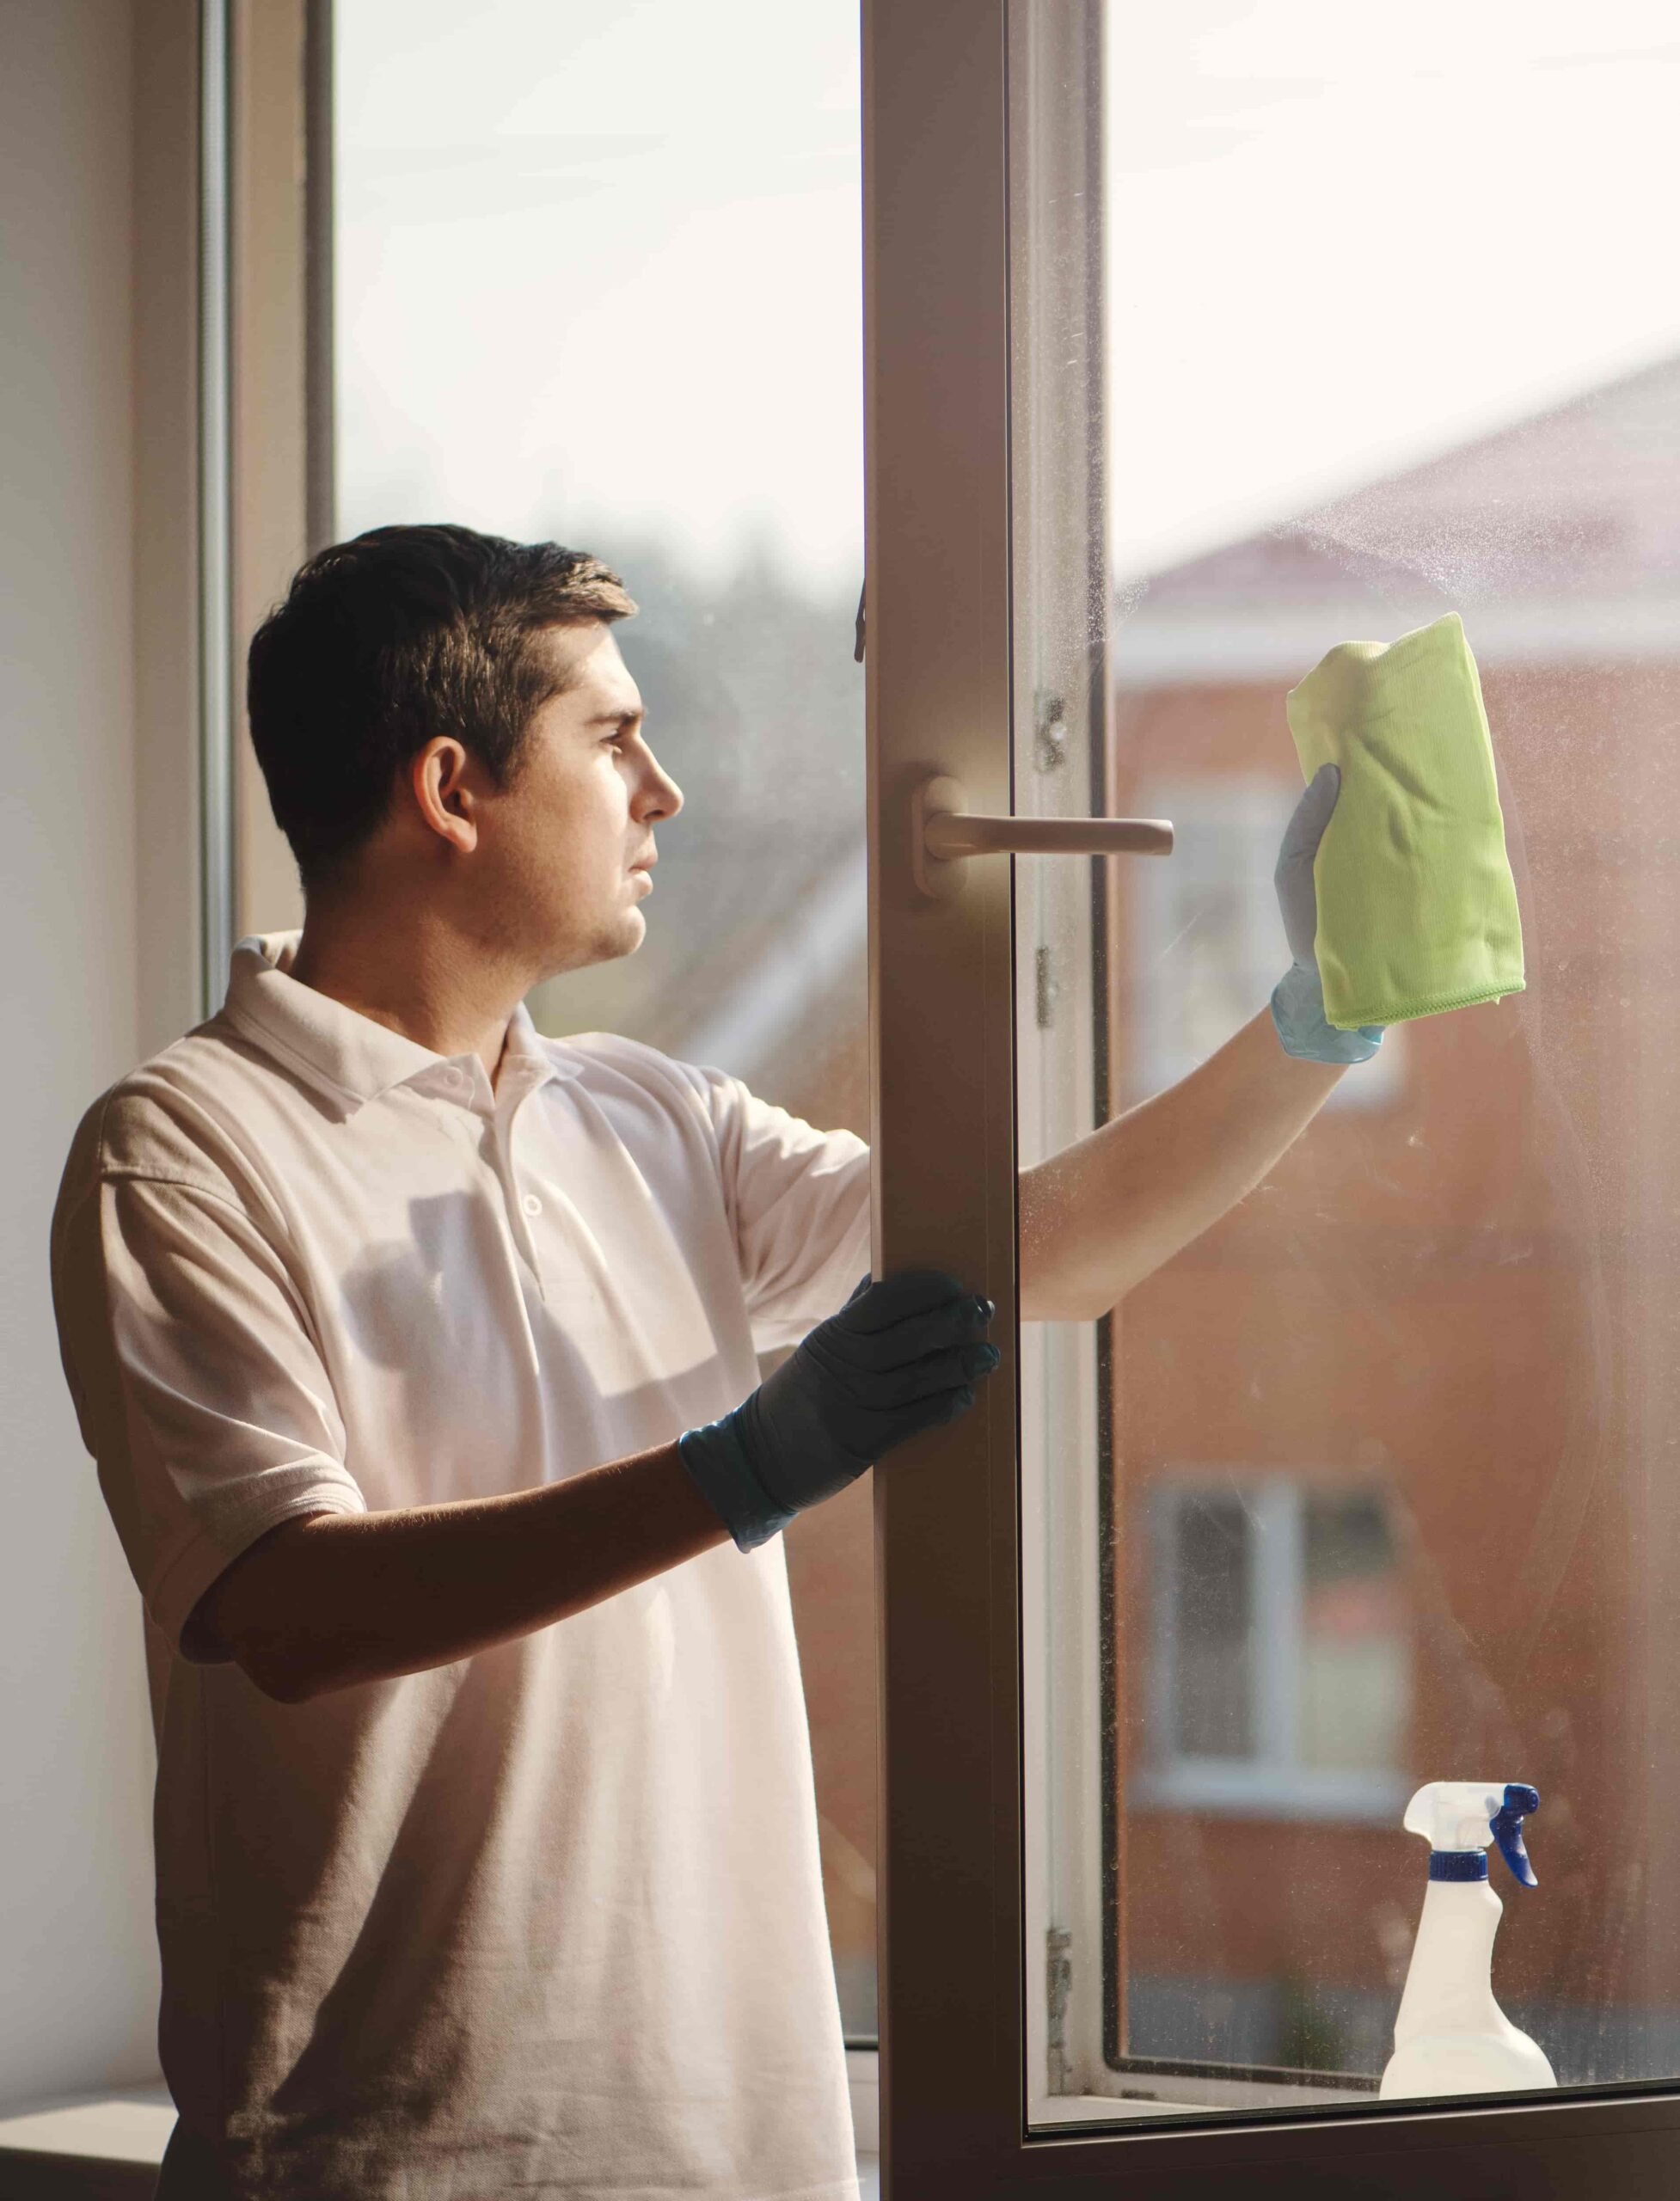 young-man-cleaning-the-window-at-home-2021-11-09-08-17-42-utc (1)